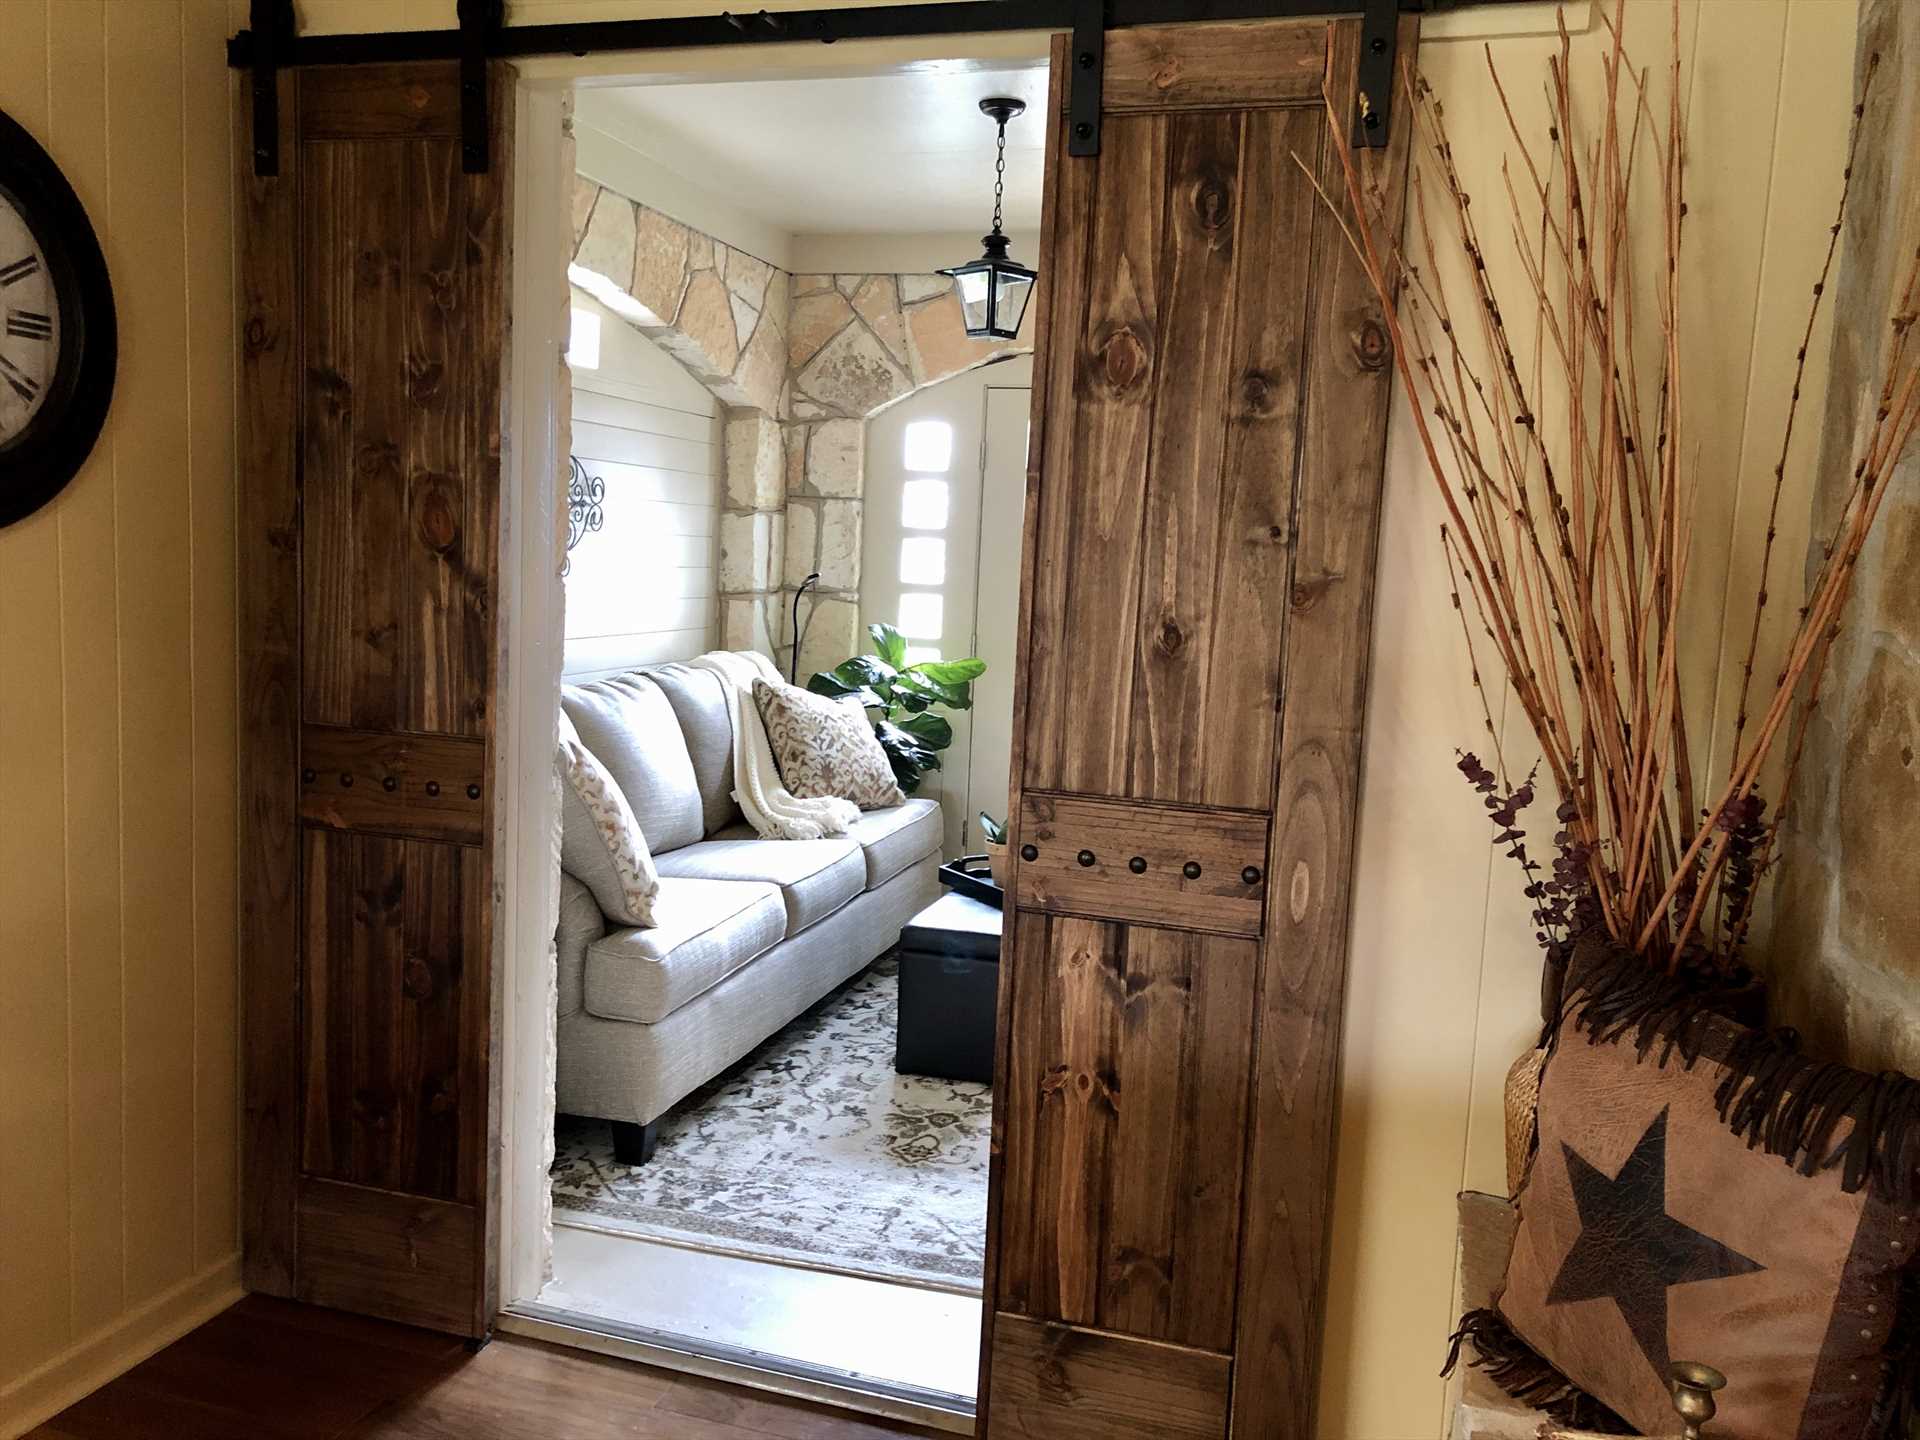                                                 The barn door access to the foyer is just one of the homey touches that gives the guest house a personality all its own.